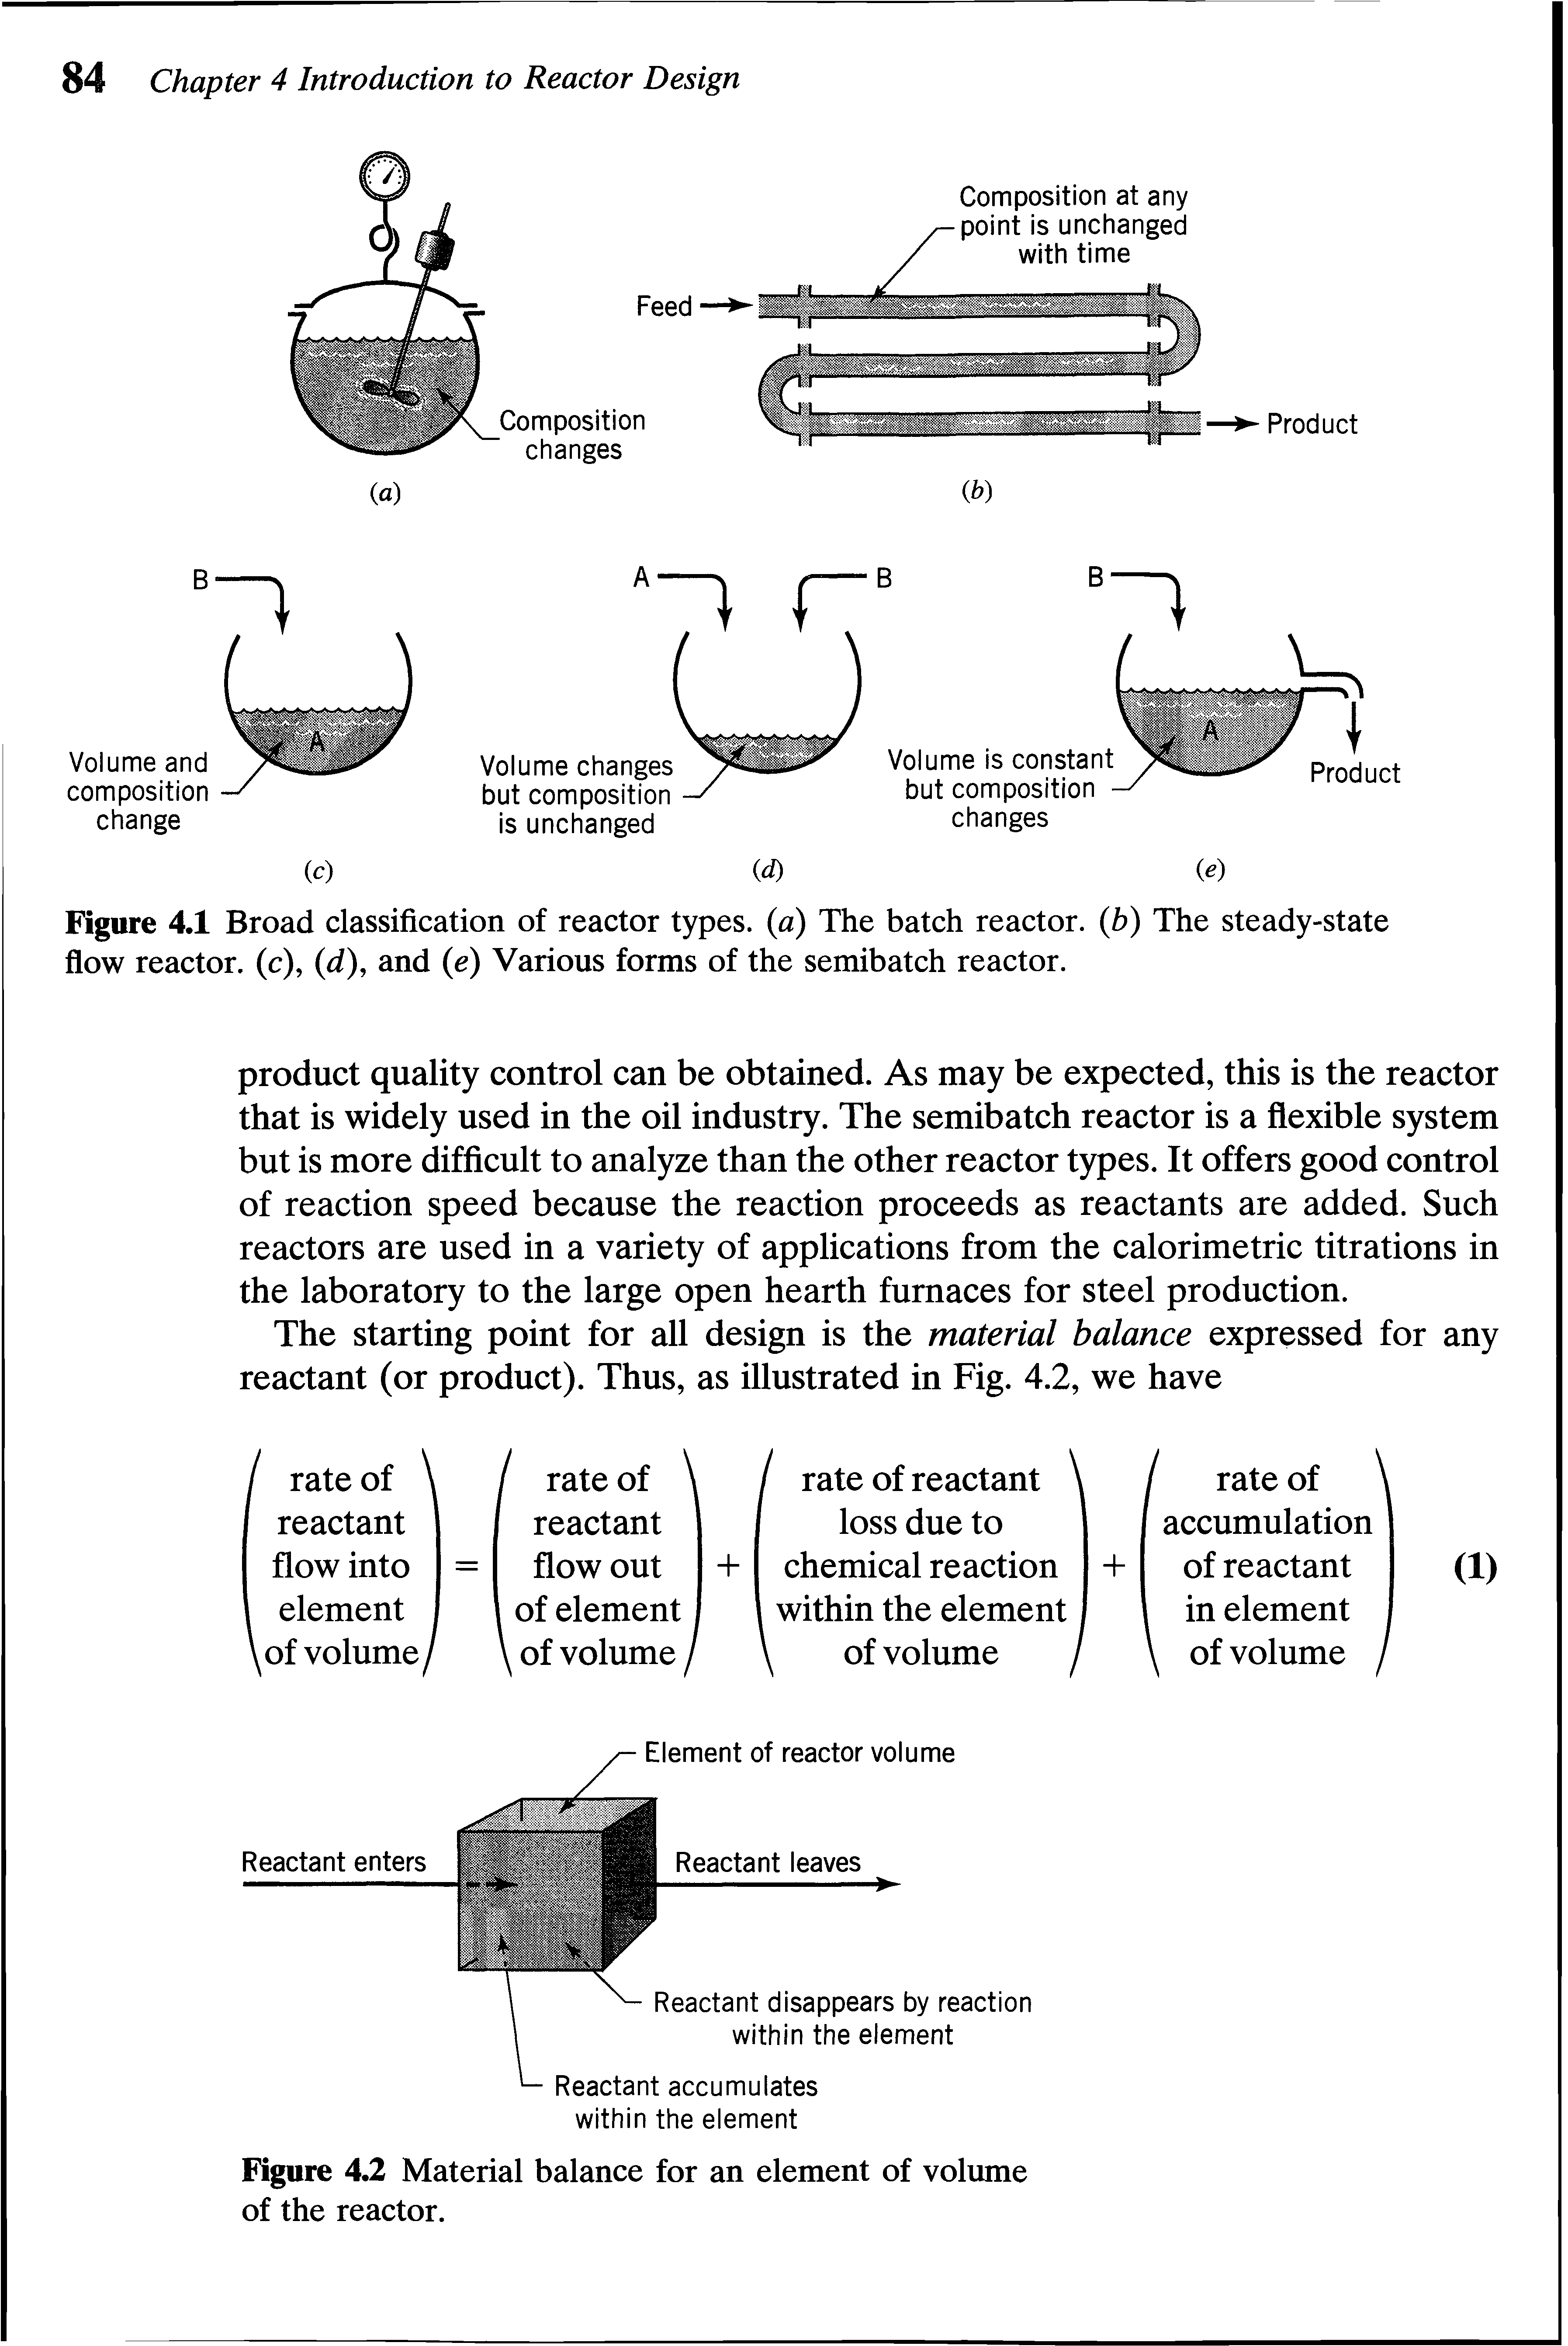 Figure 4.1 Broad classification of reactor types, a) The batch reactor, b) The steady-state flow reactor, (c), d), and (e) Various forms of the semibatch reactor.